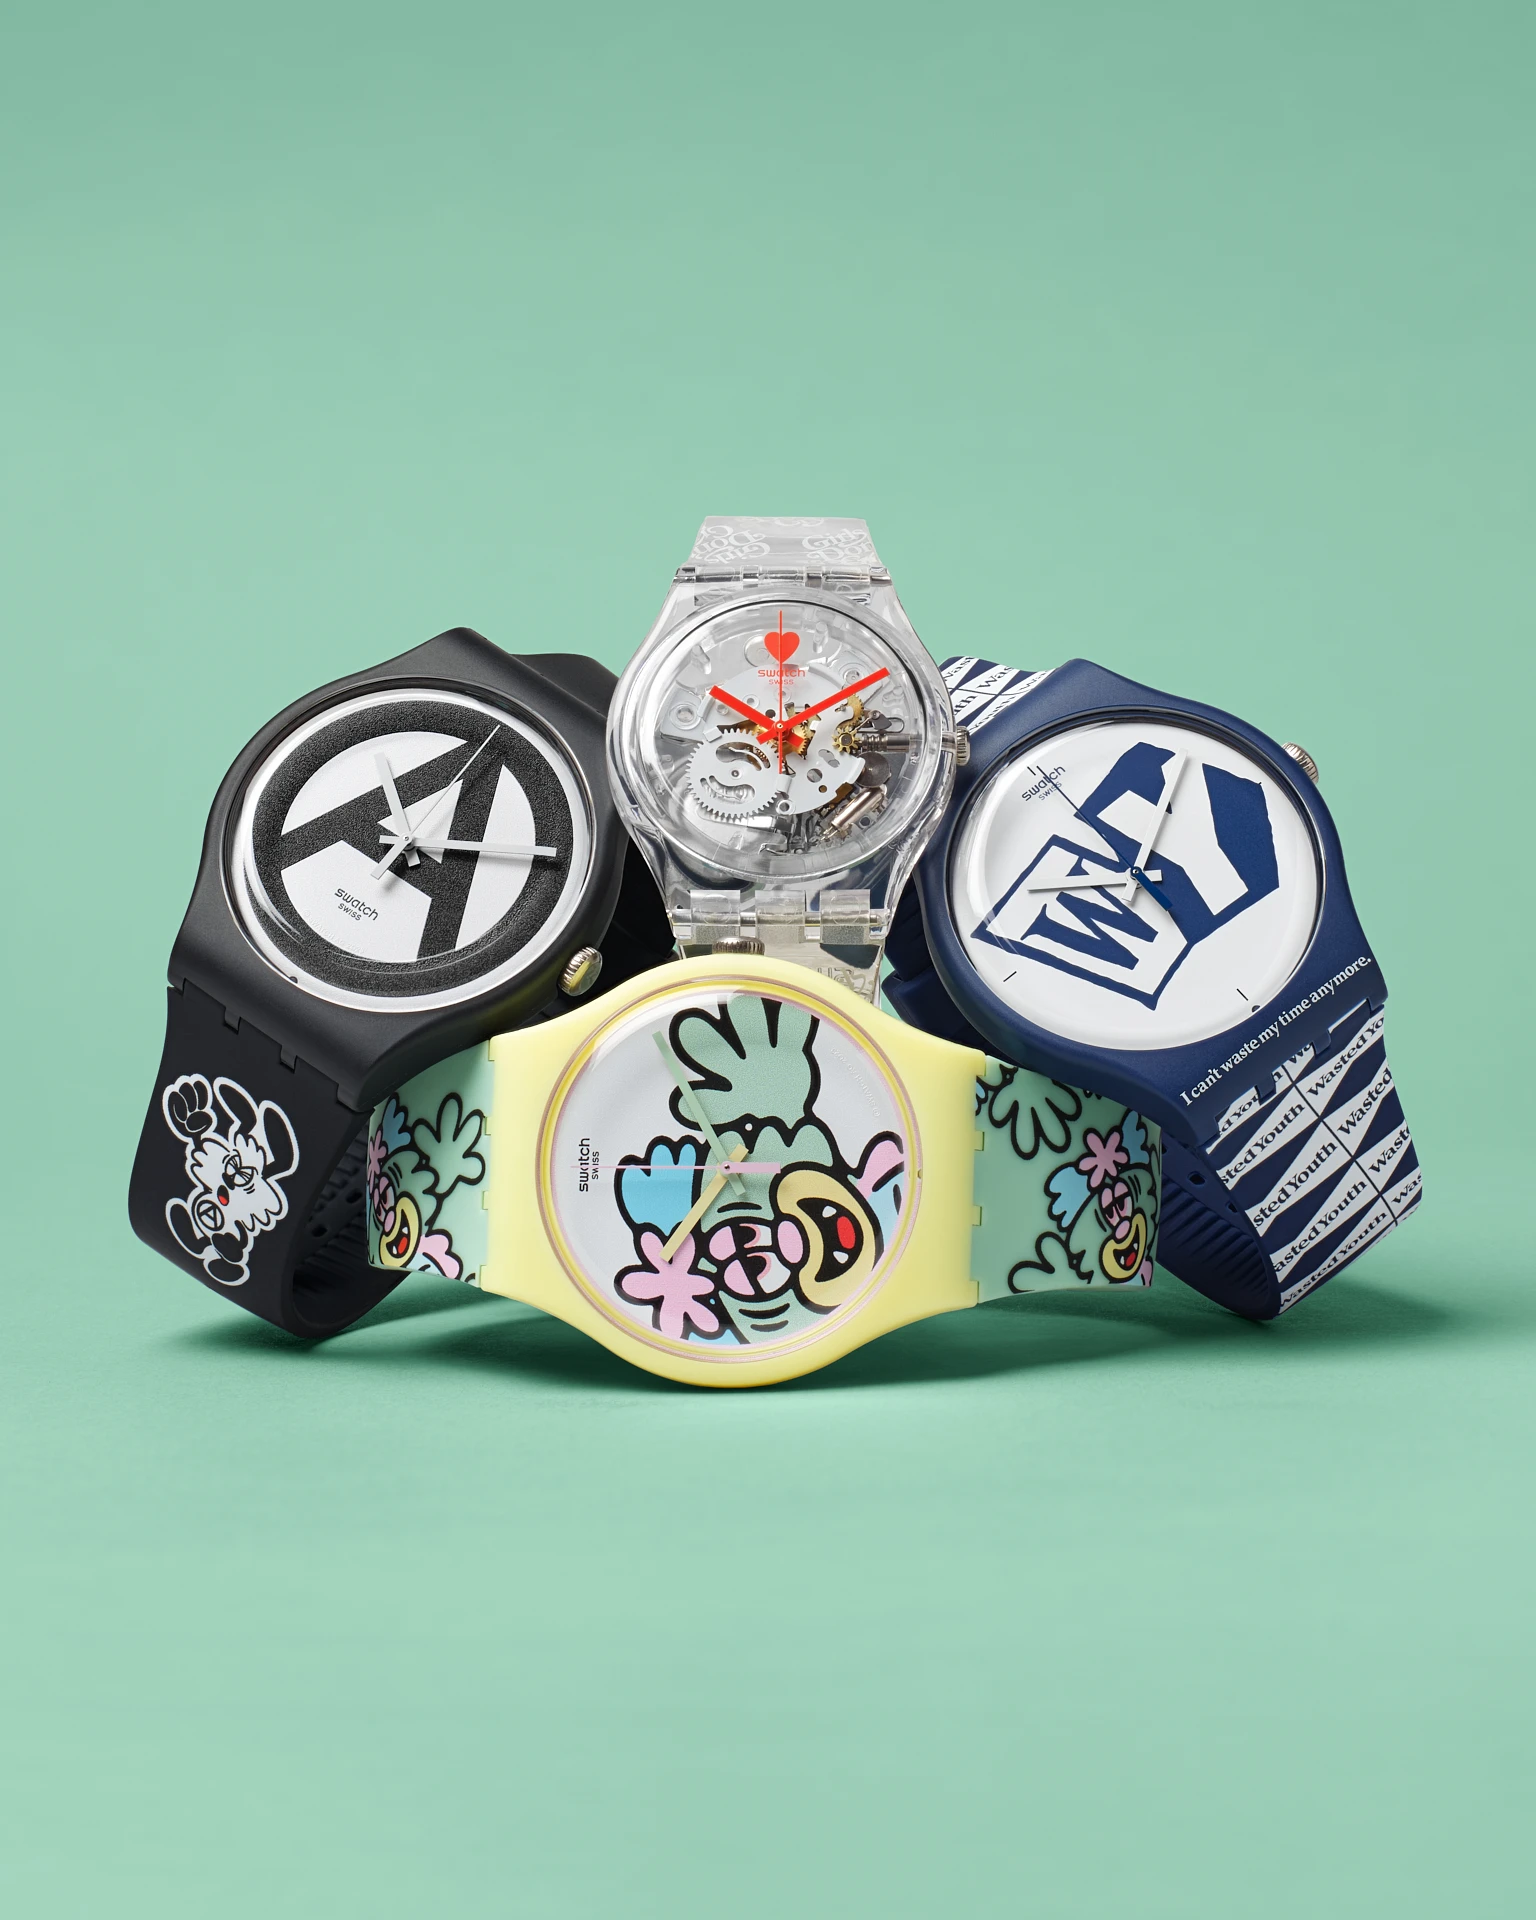 Positive messaging with the Swatch x Verdy Collection